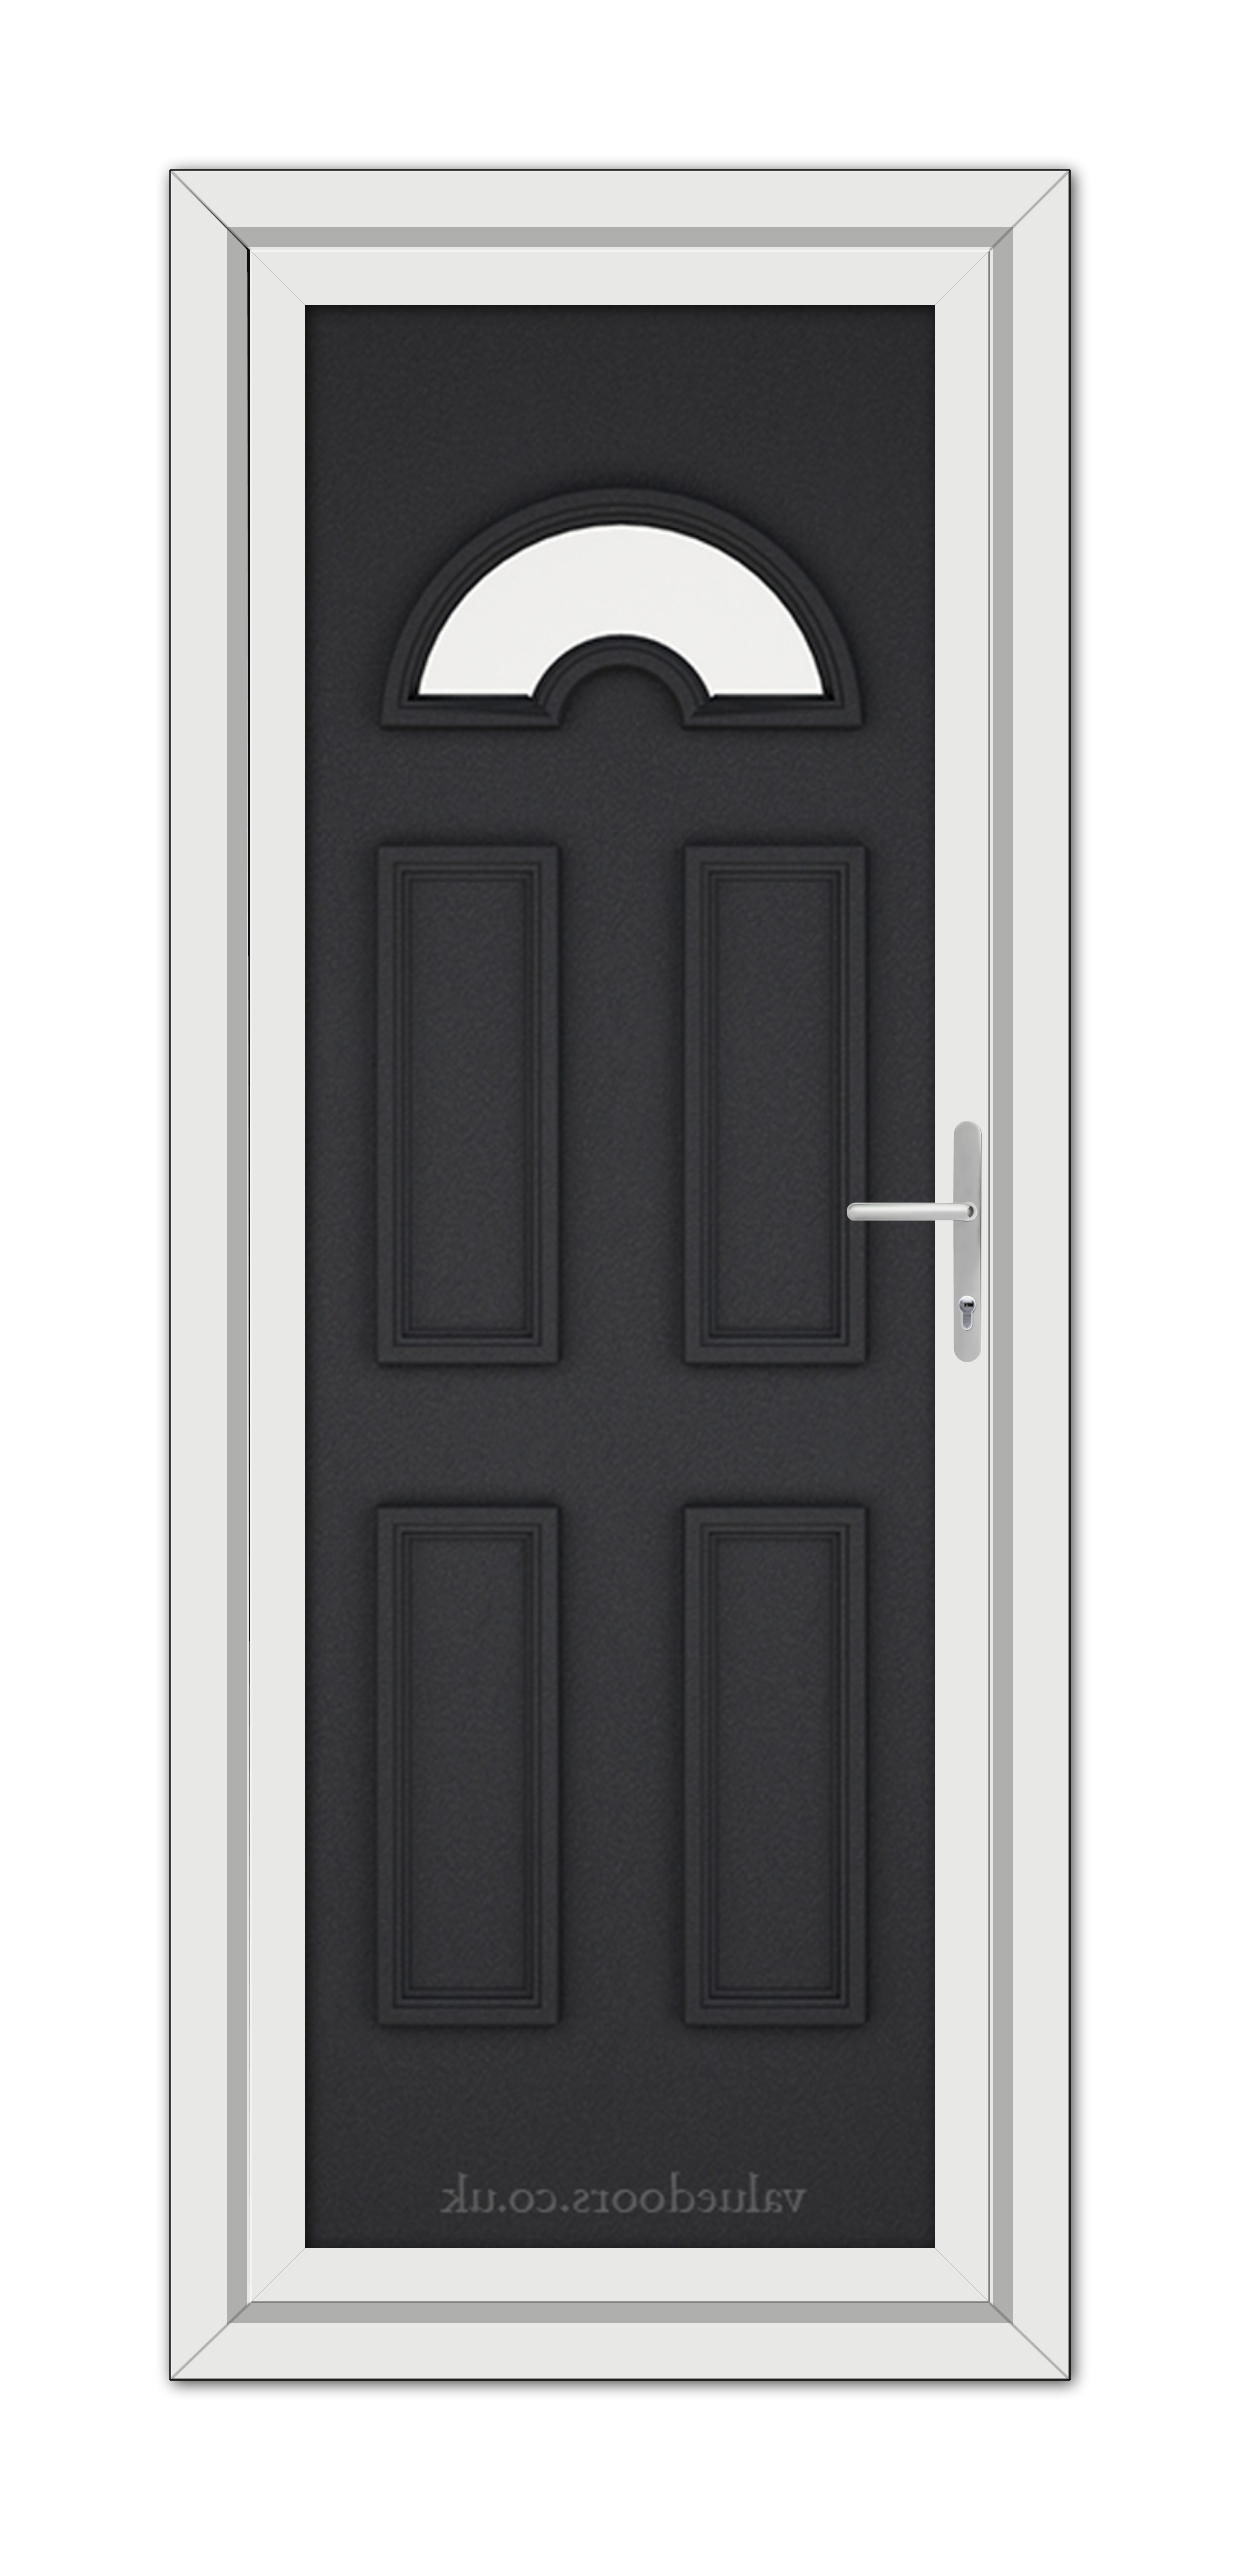 A modern Black Brown Sandringham Solid uPVC Door with six panels and a semicircle window at the top, framed in white, featuring a metallic handle on the right side.